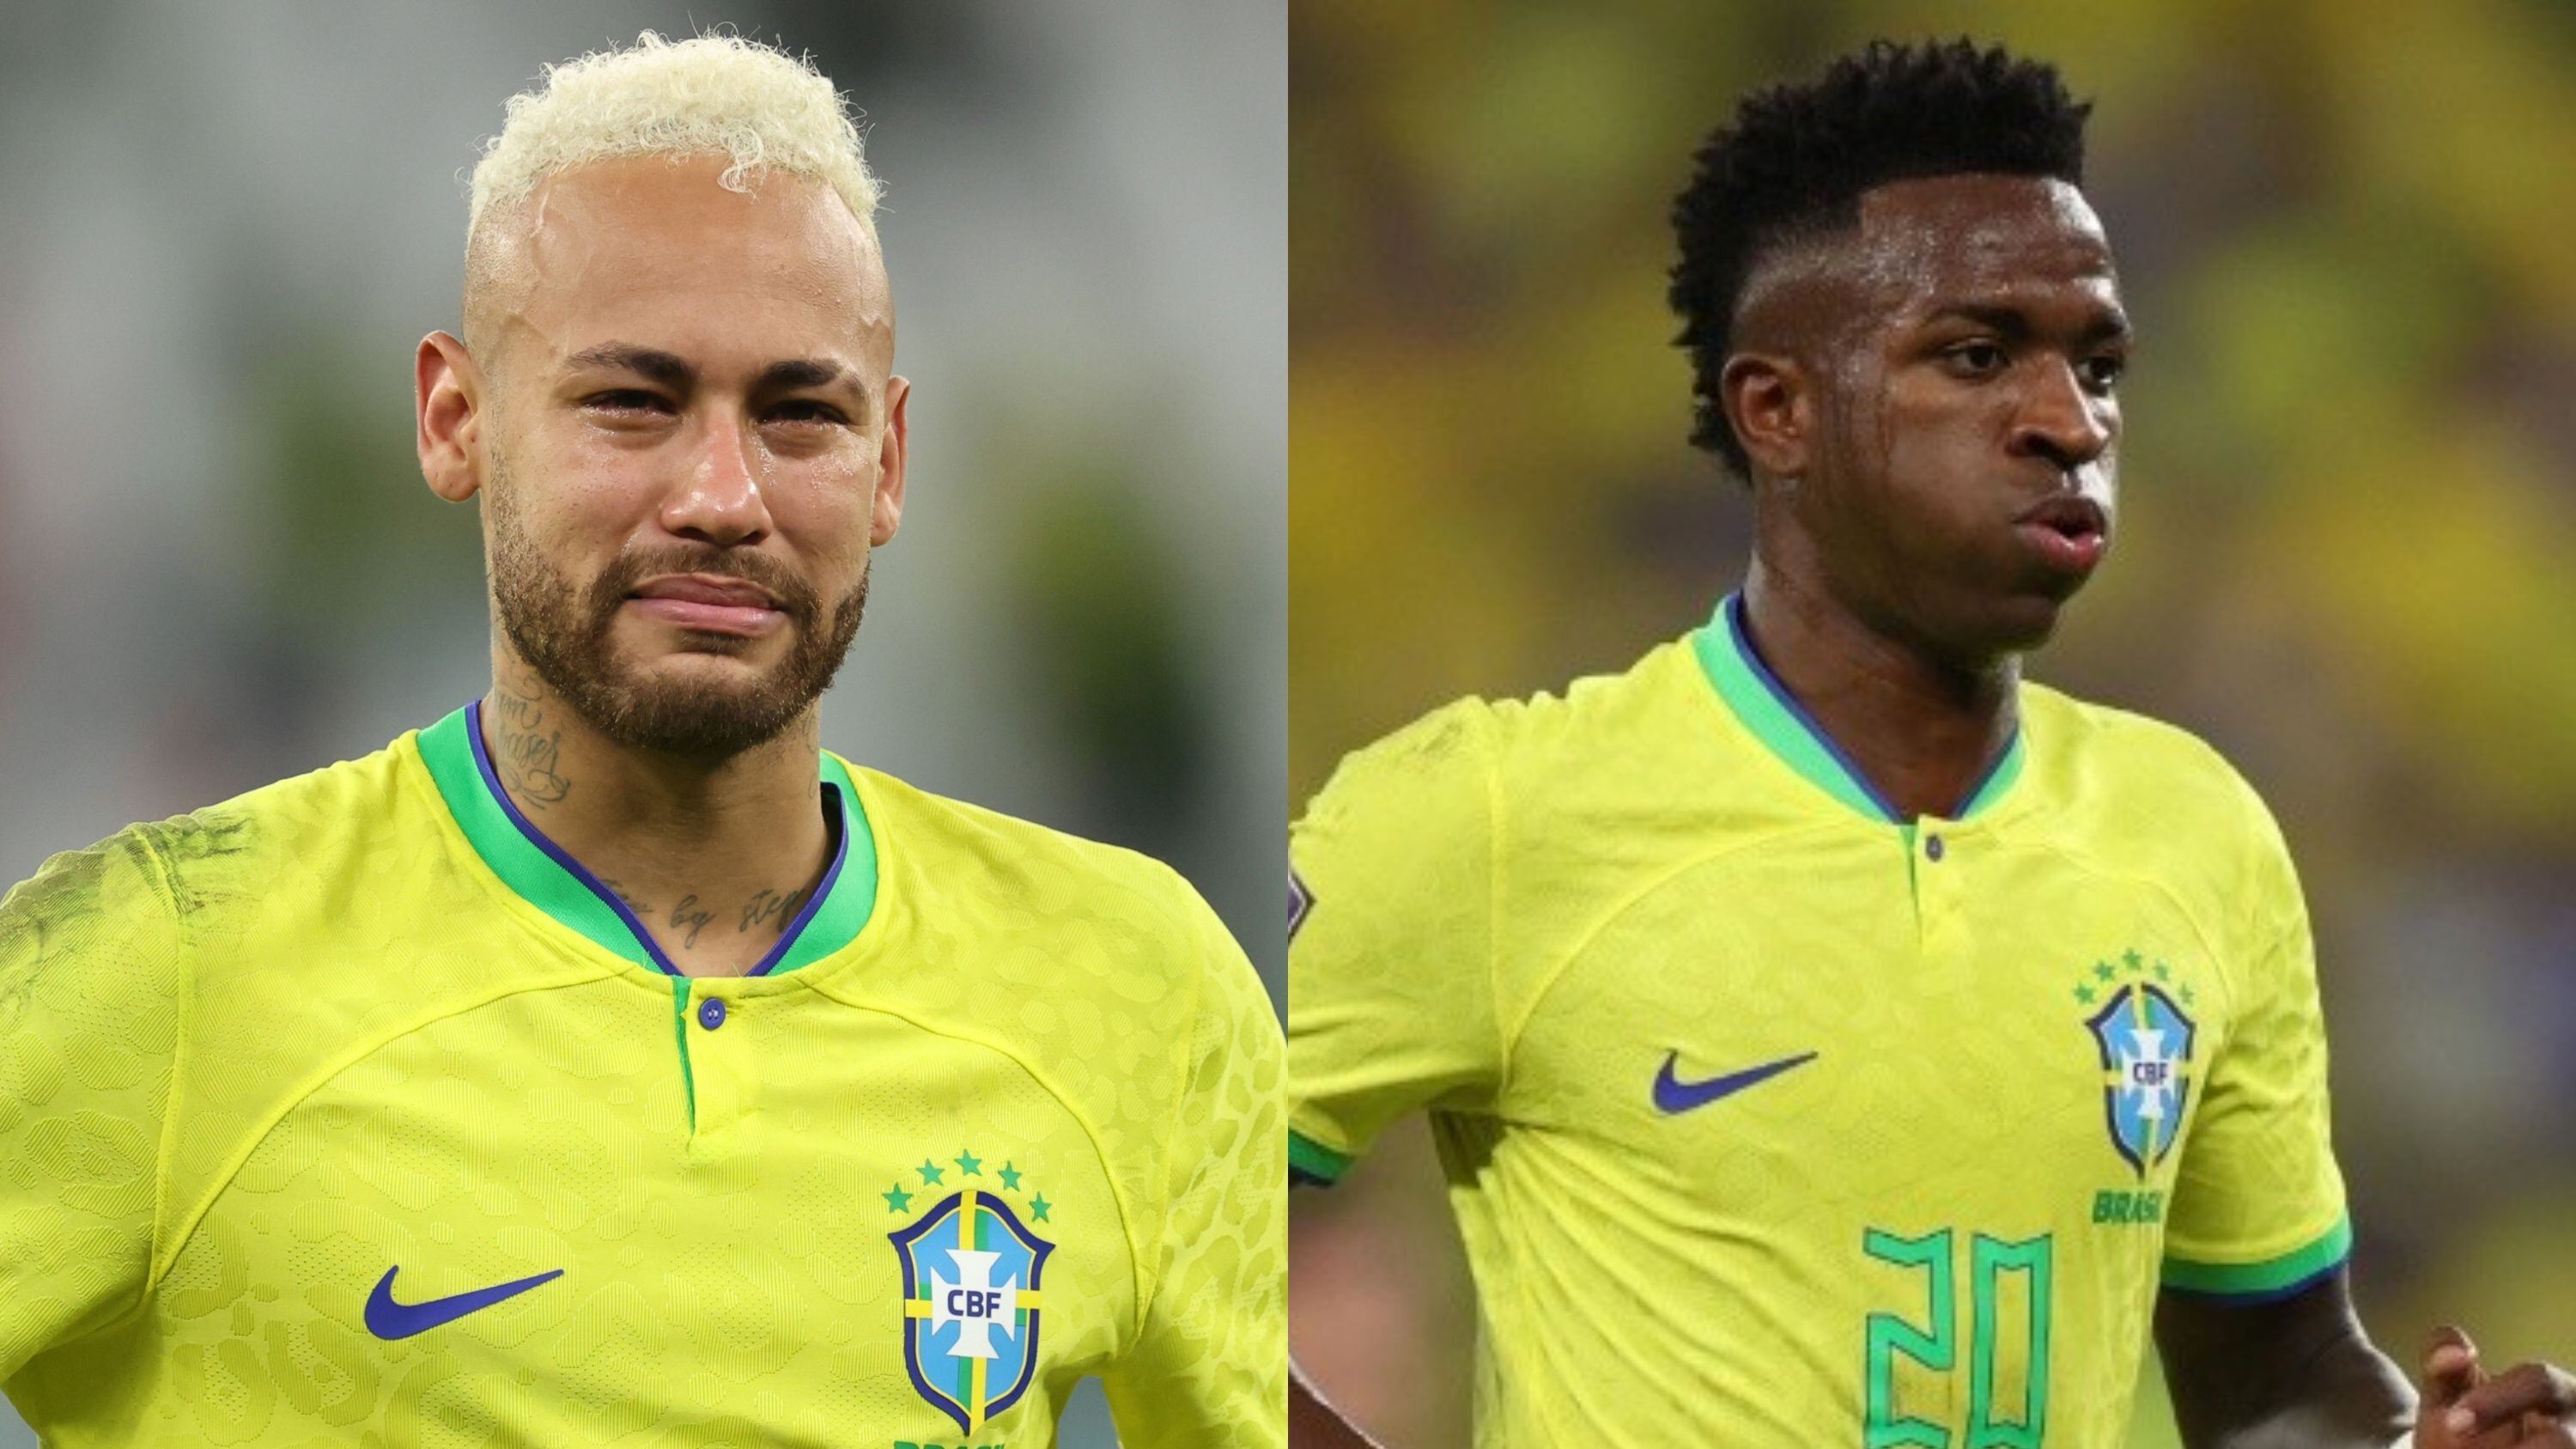 After the Copa America draw, the news in Brazil that impacts Neymar and Vinicius